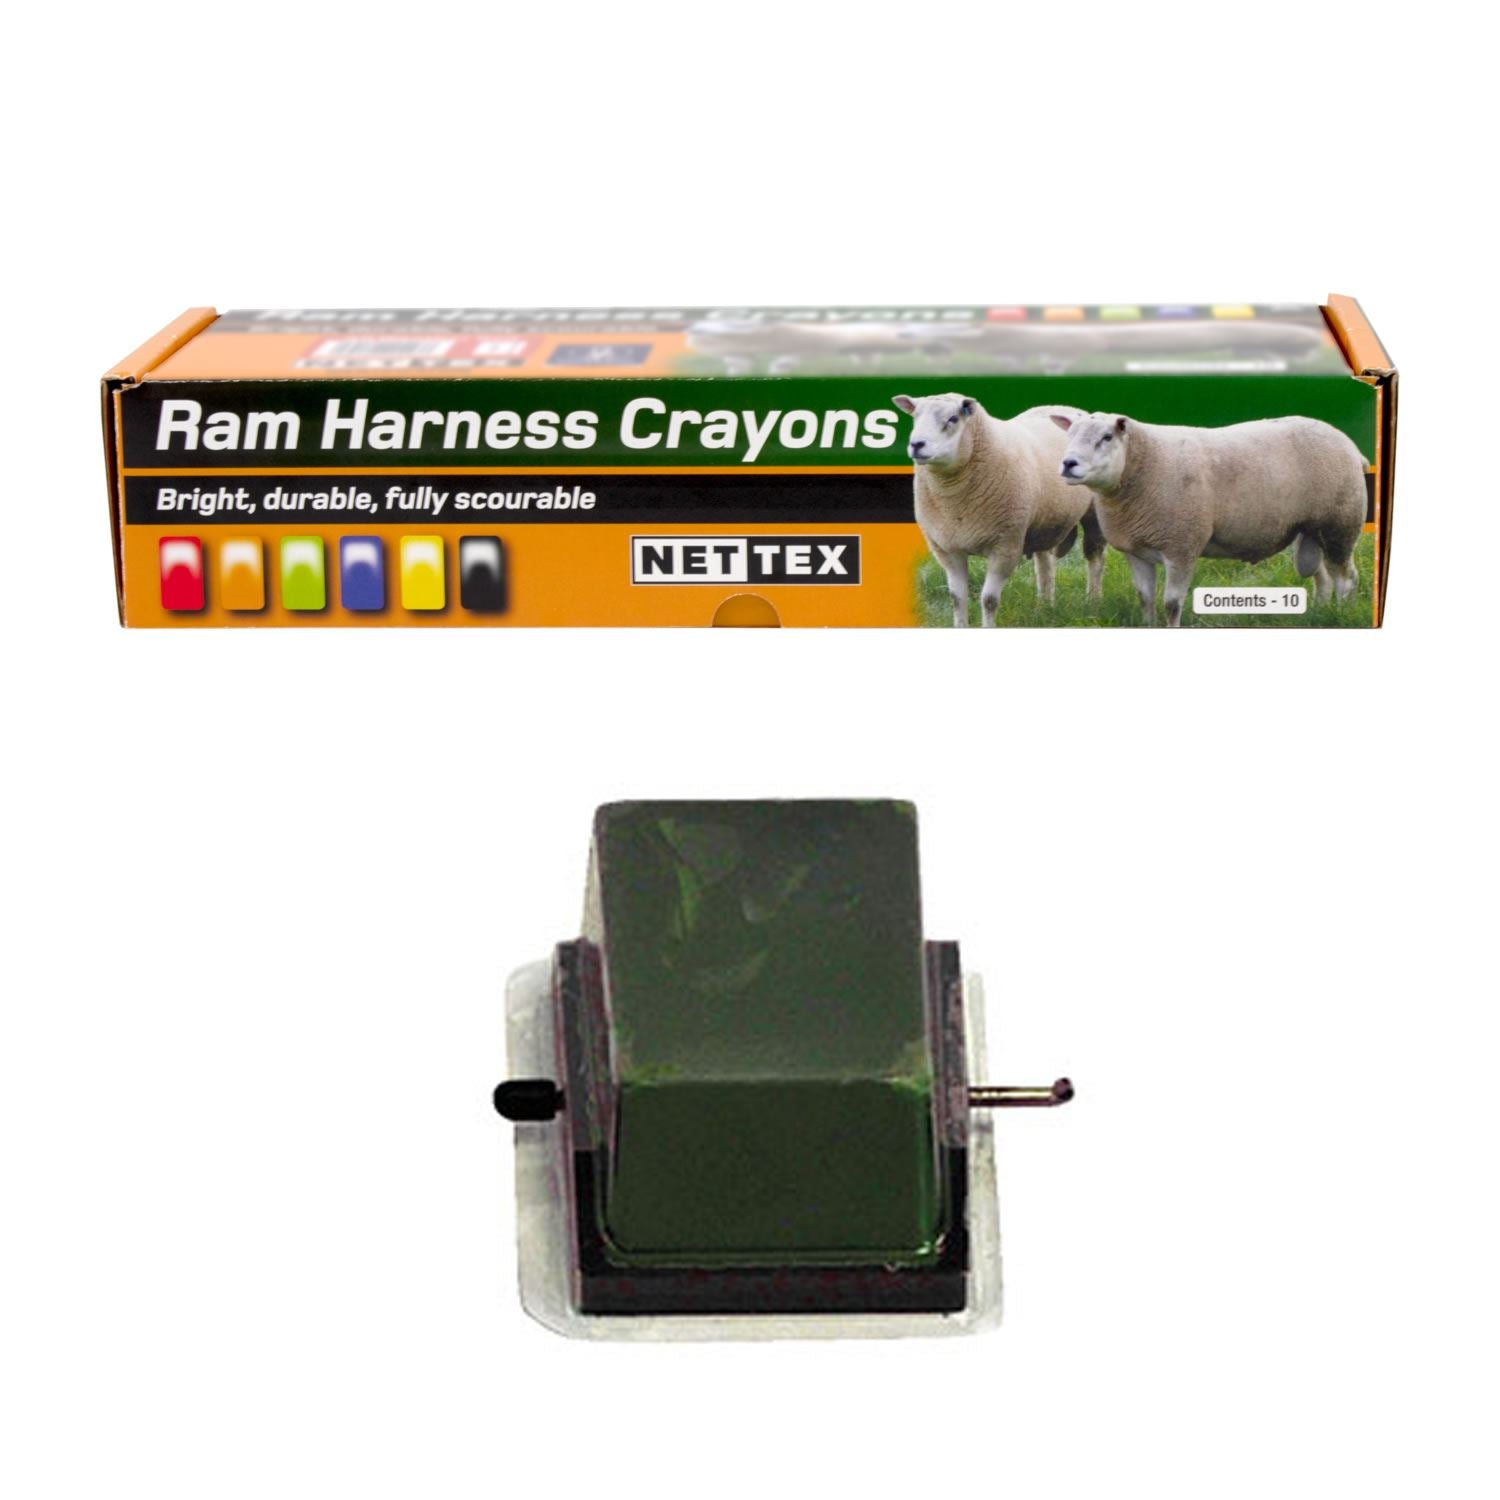 Nettex Cold Crayons - Just Horse Riders